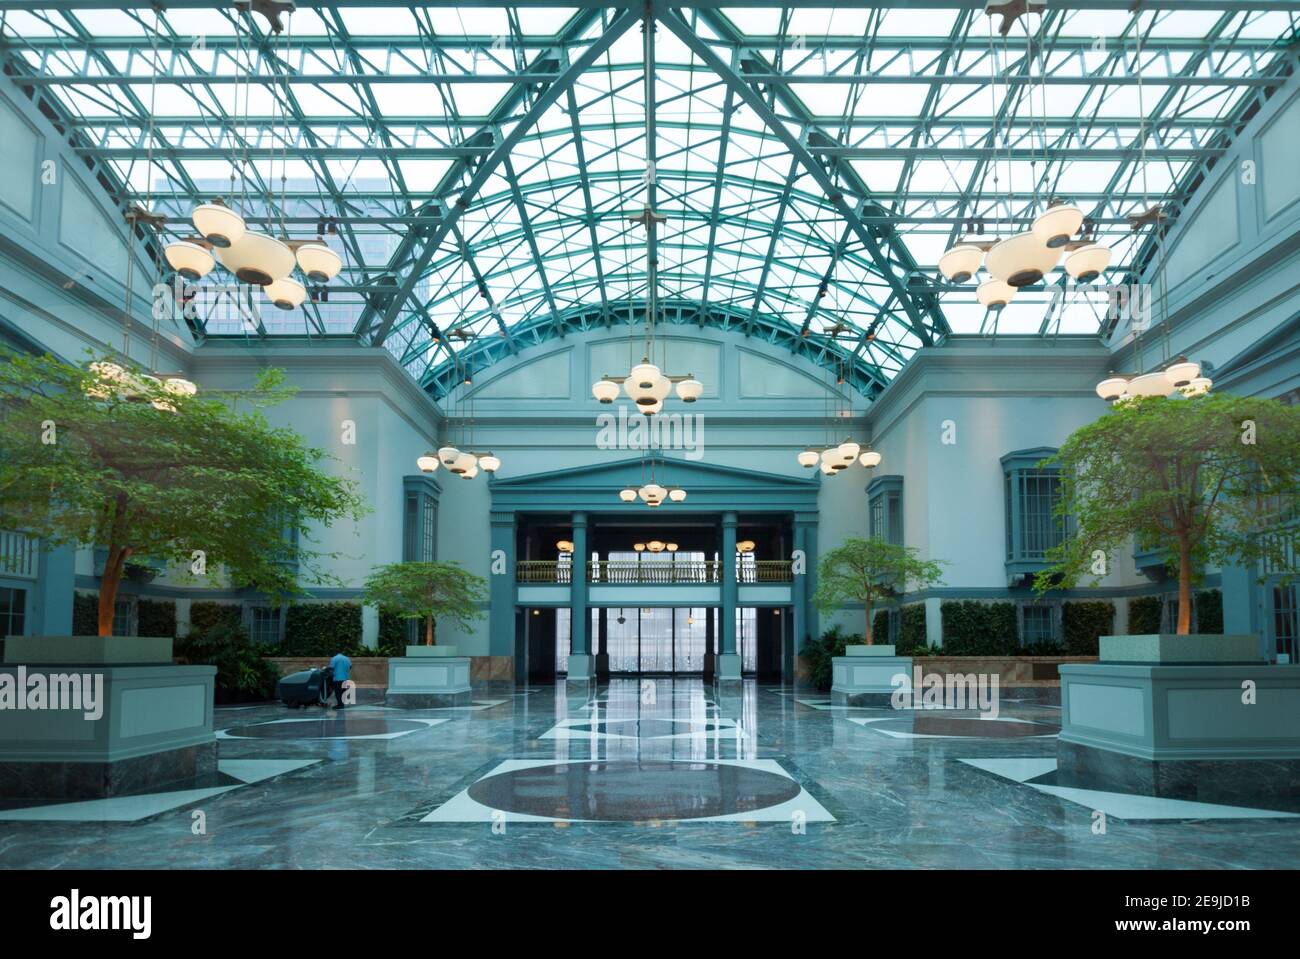 The Winter Garden, the architectural highlight of the Harold Washington Library Center in Chicago, Illinois. Stock Photo